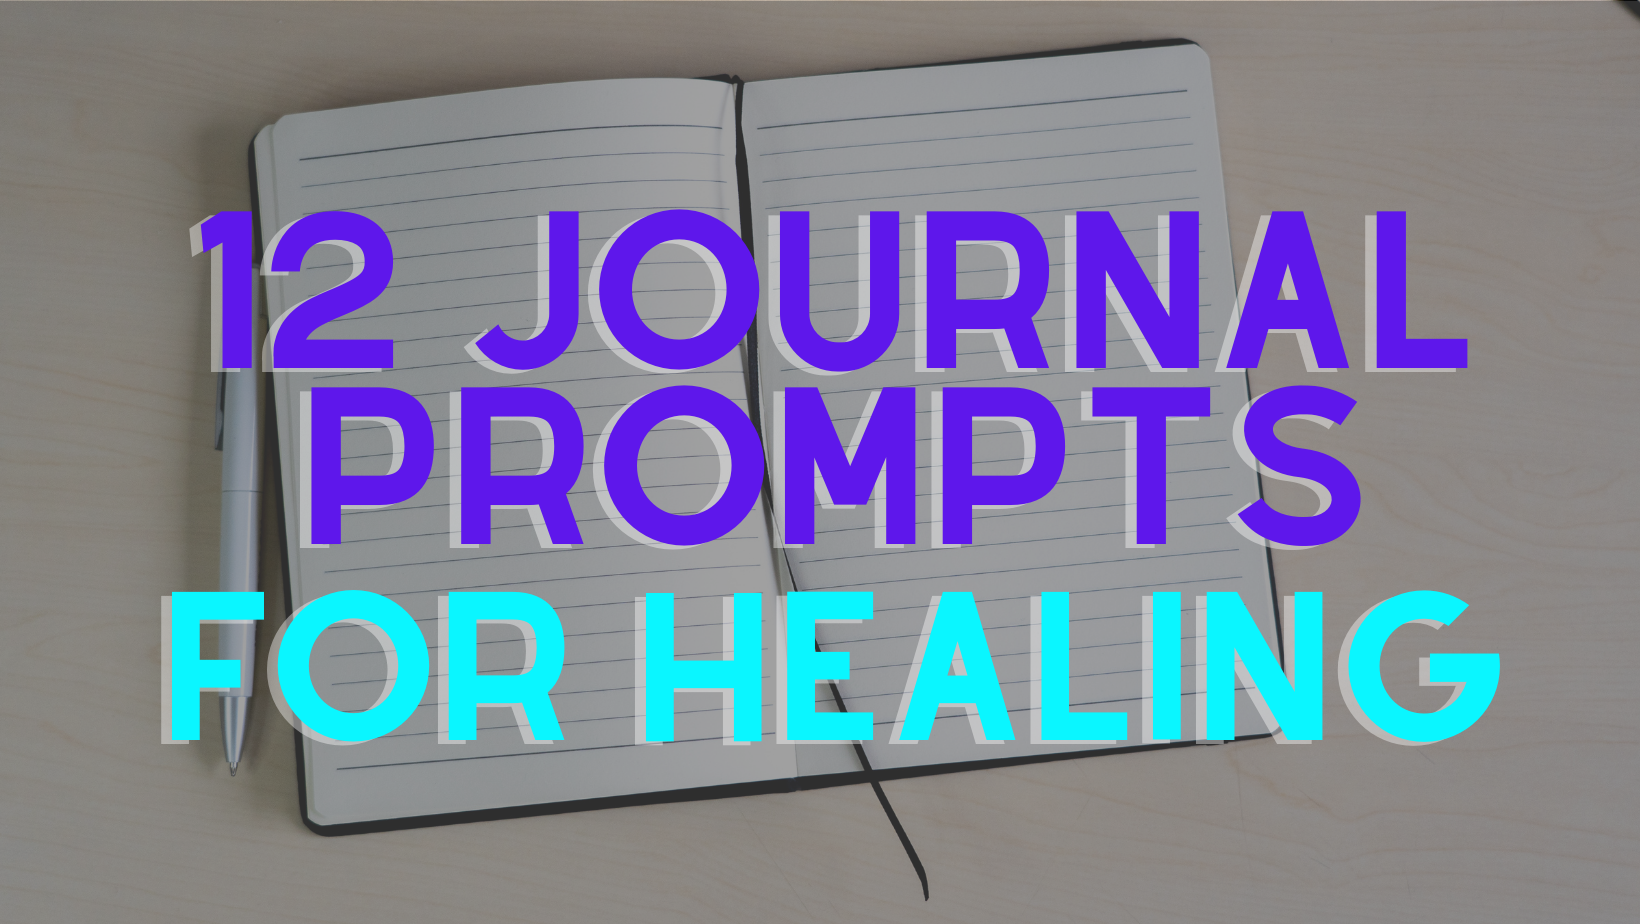 12 Journal Prompts for Healing